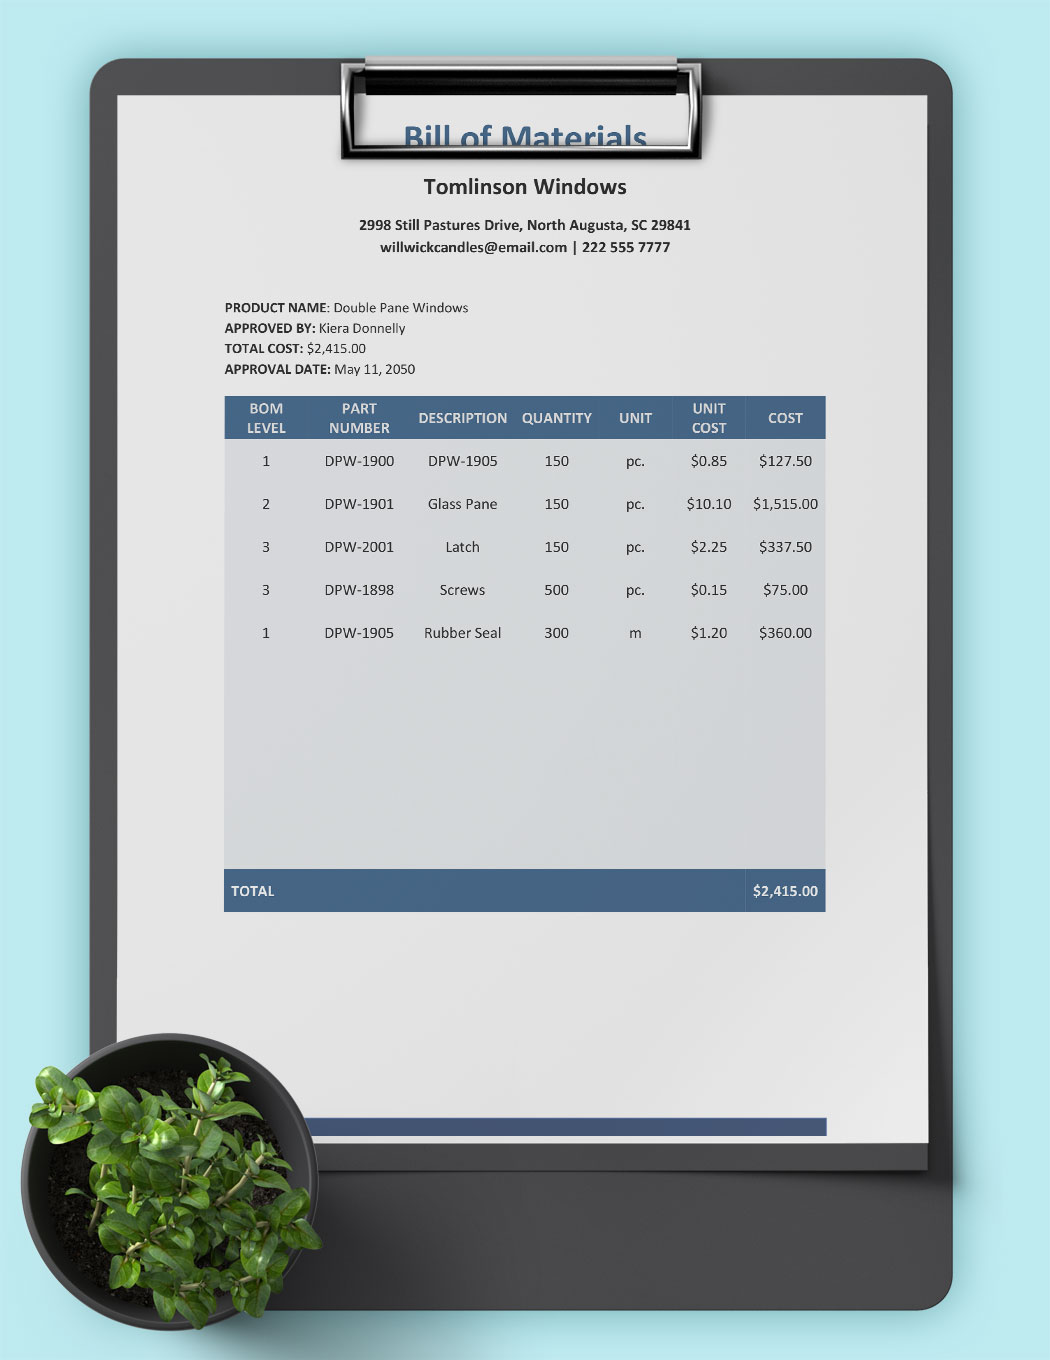 Simple Bill Of Materials Template